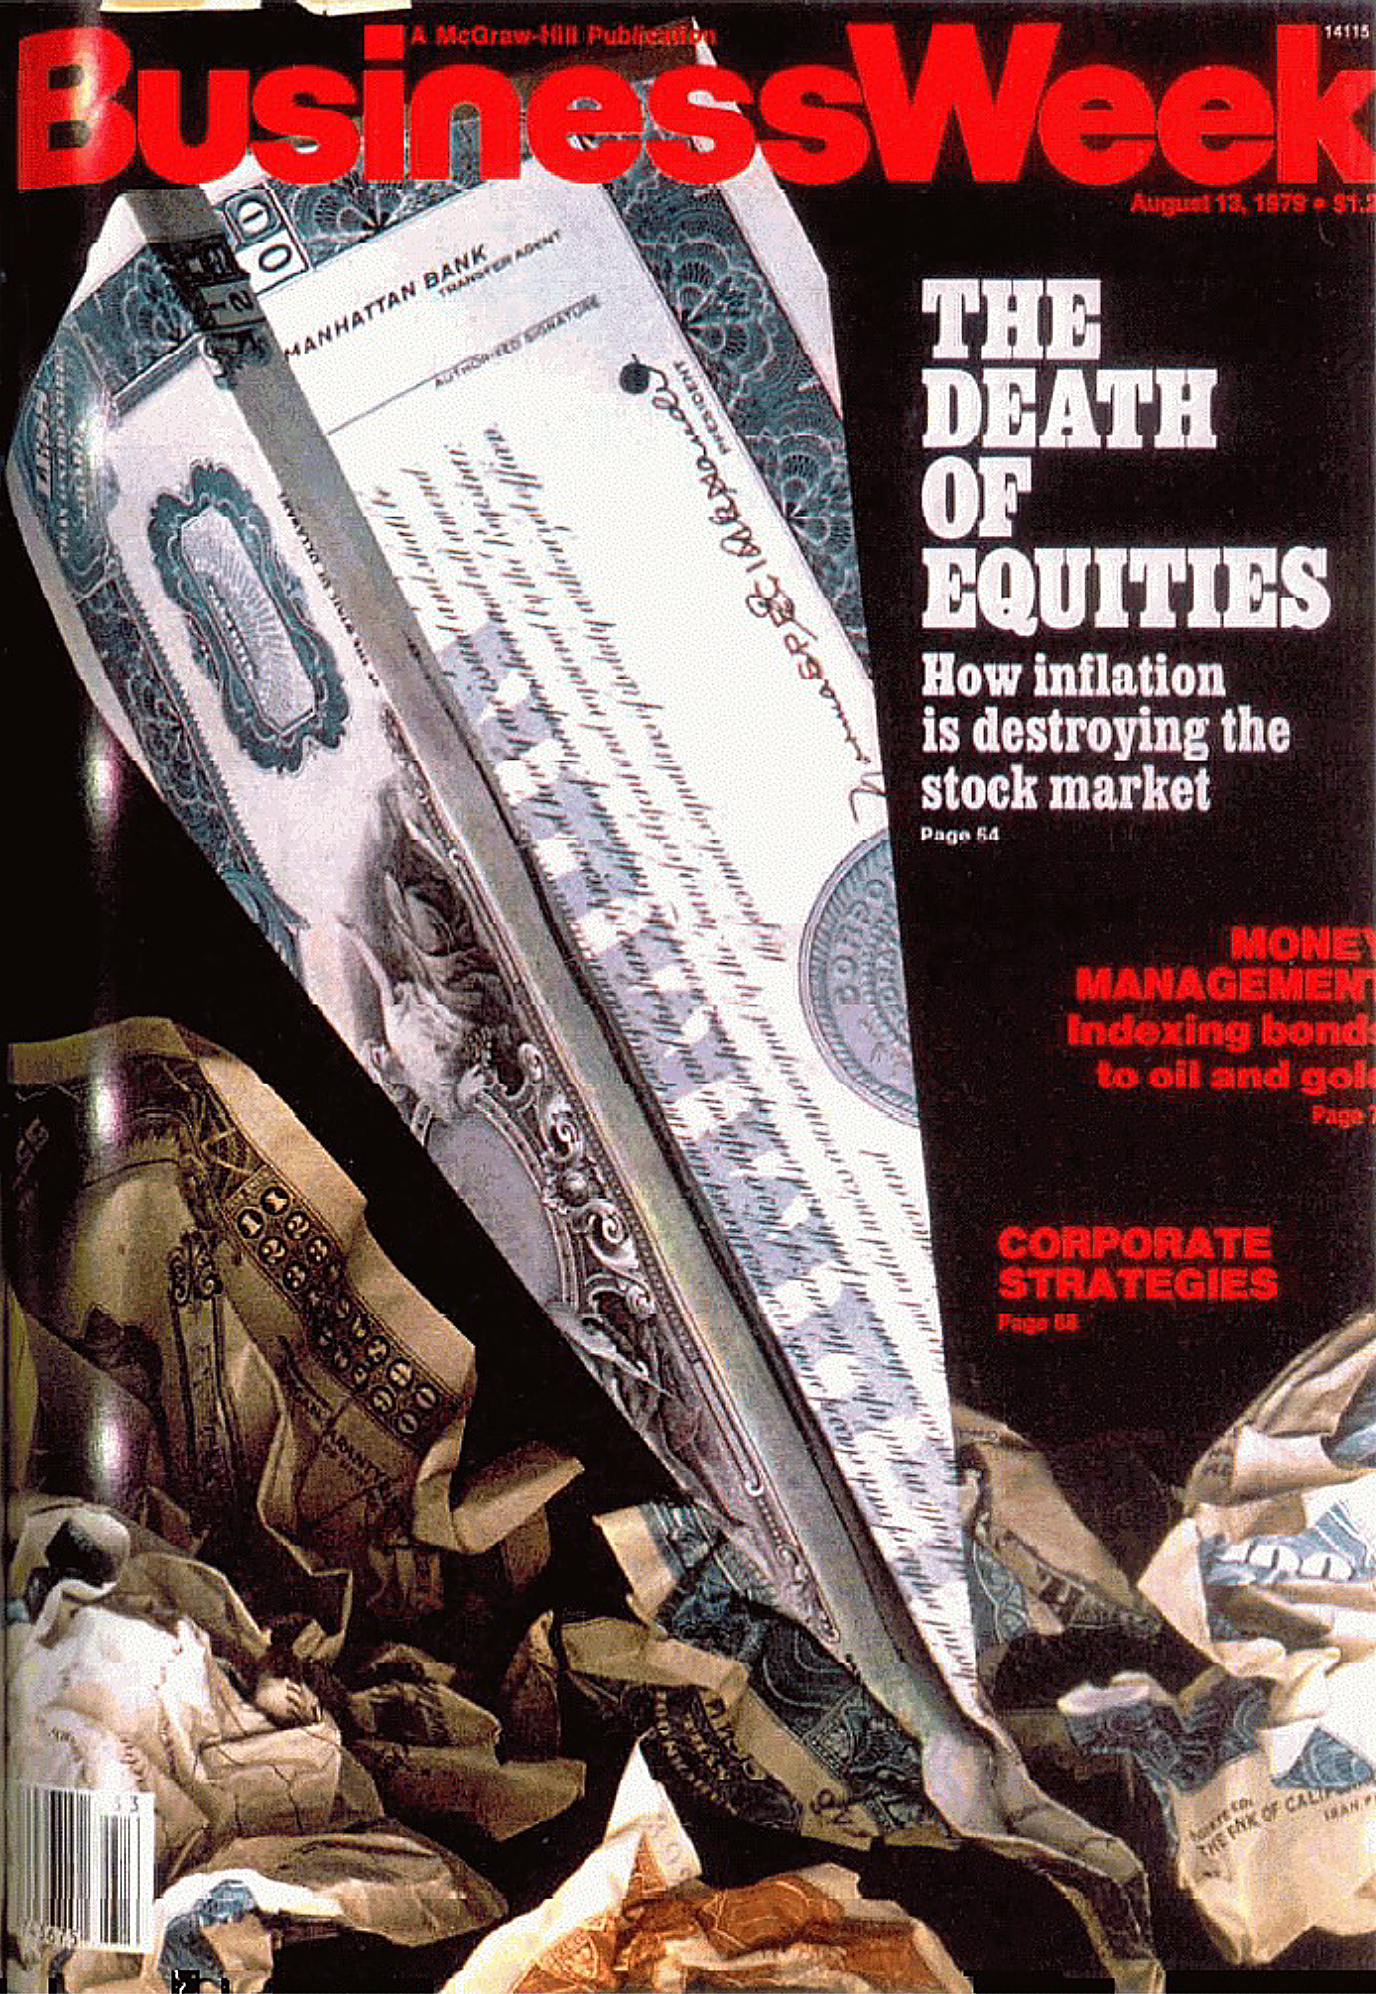 Image of Business Week "The Death of Equities" cover. 